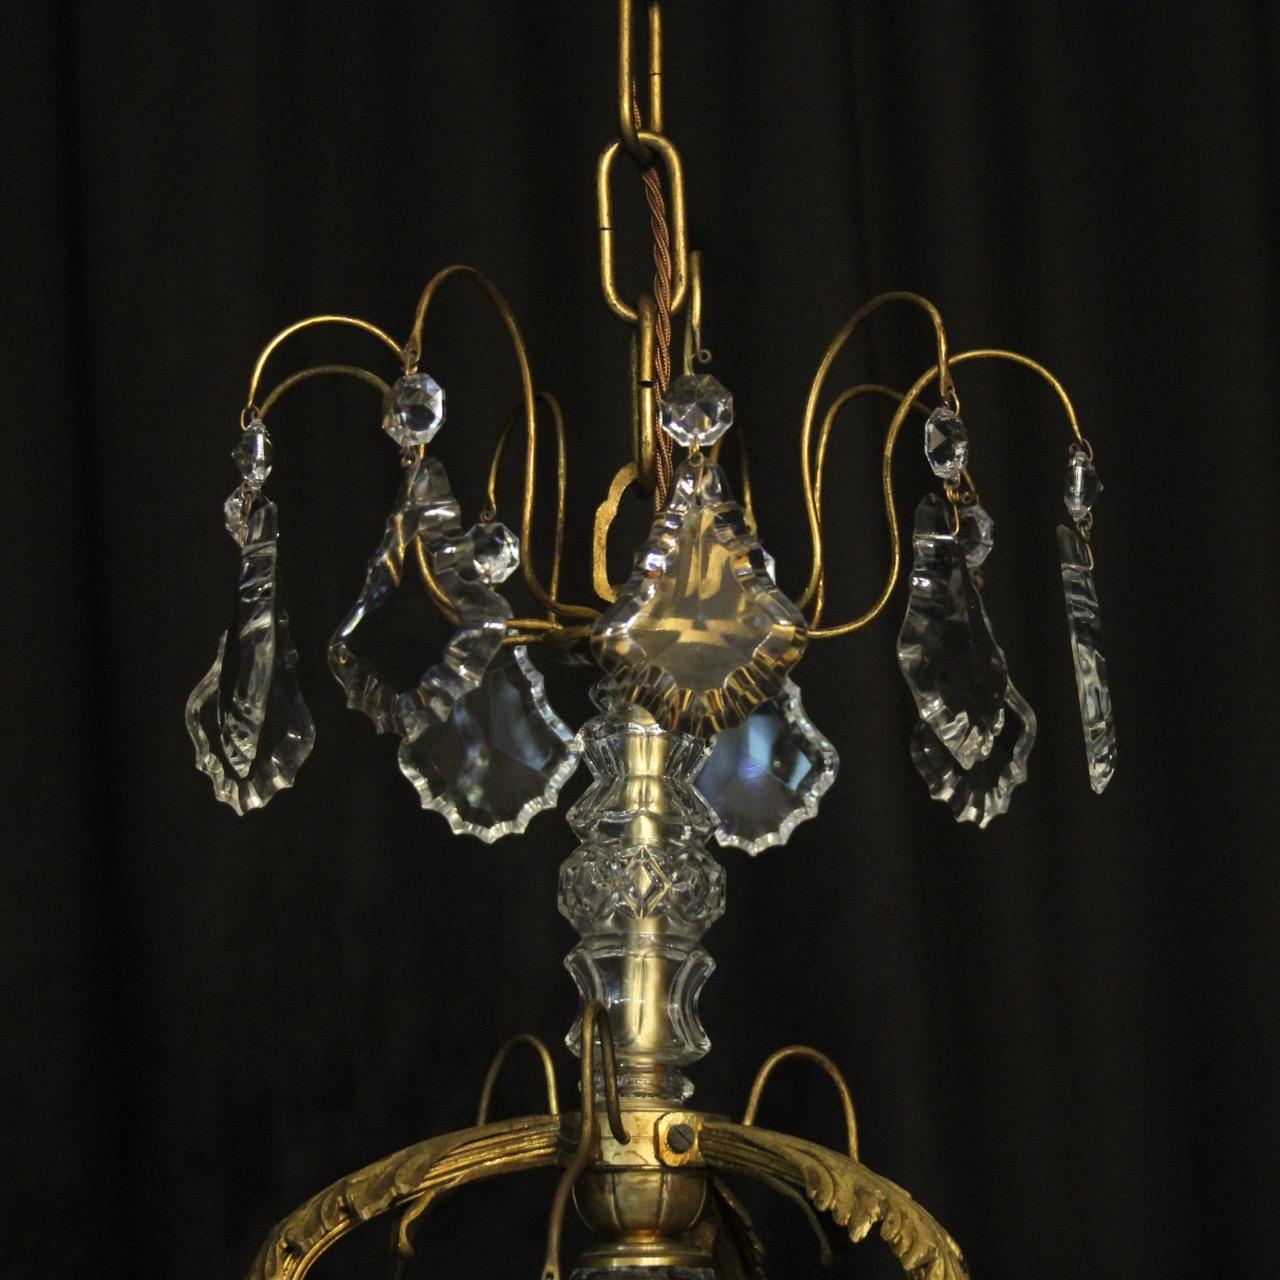 20th Century French Gilded & Crystal Seven-Light Birdcage Antique Chandelier